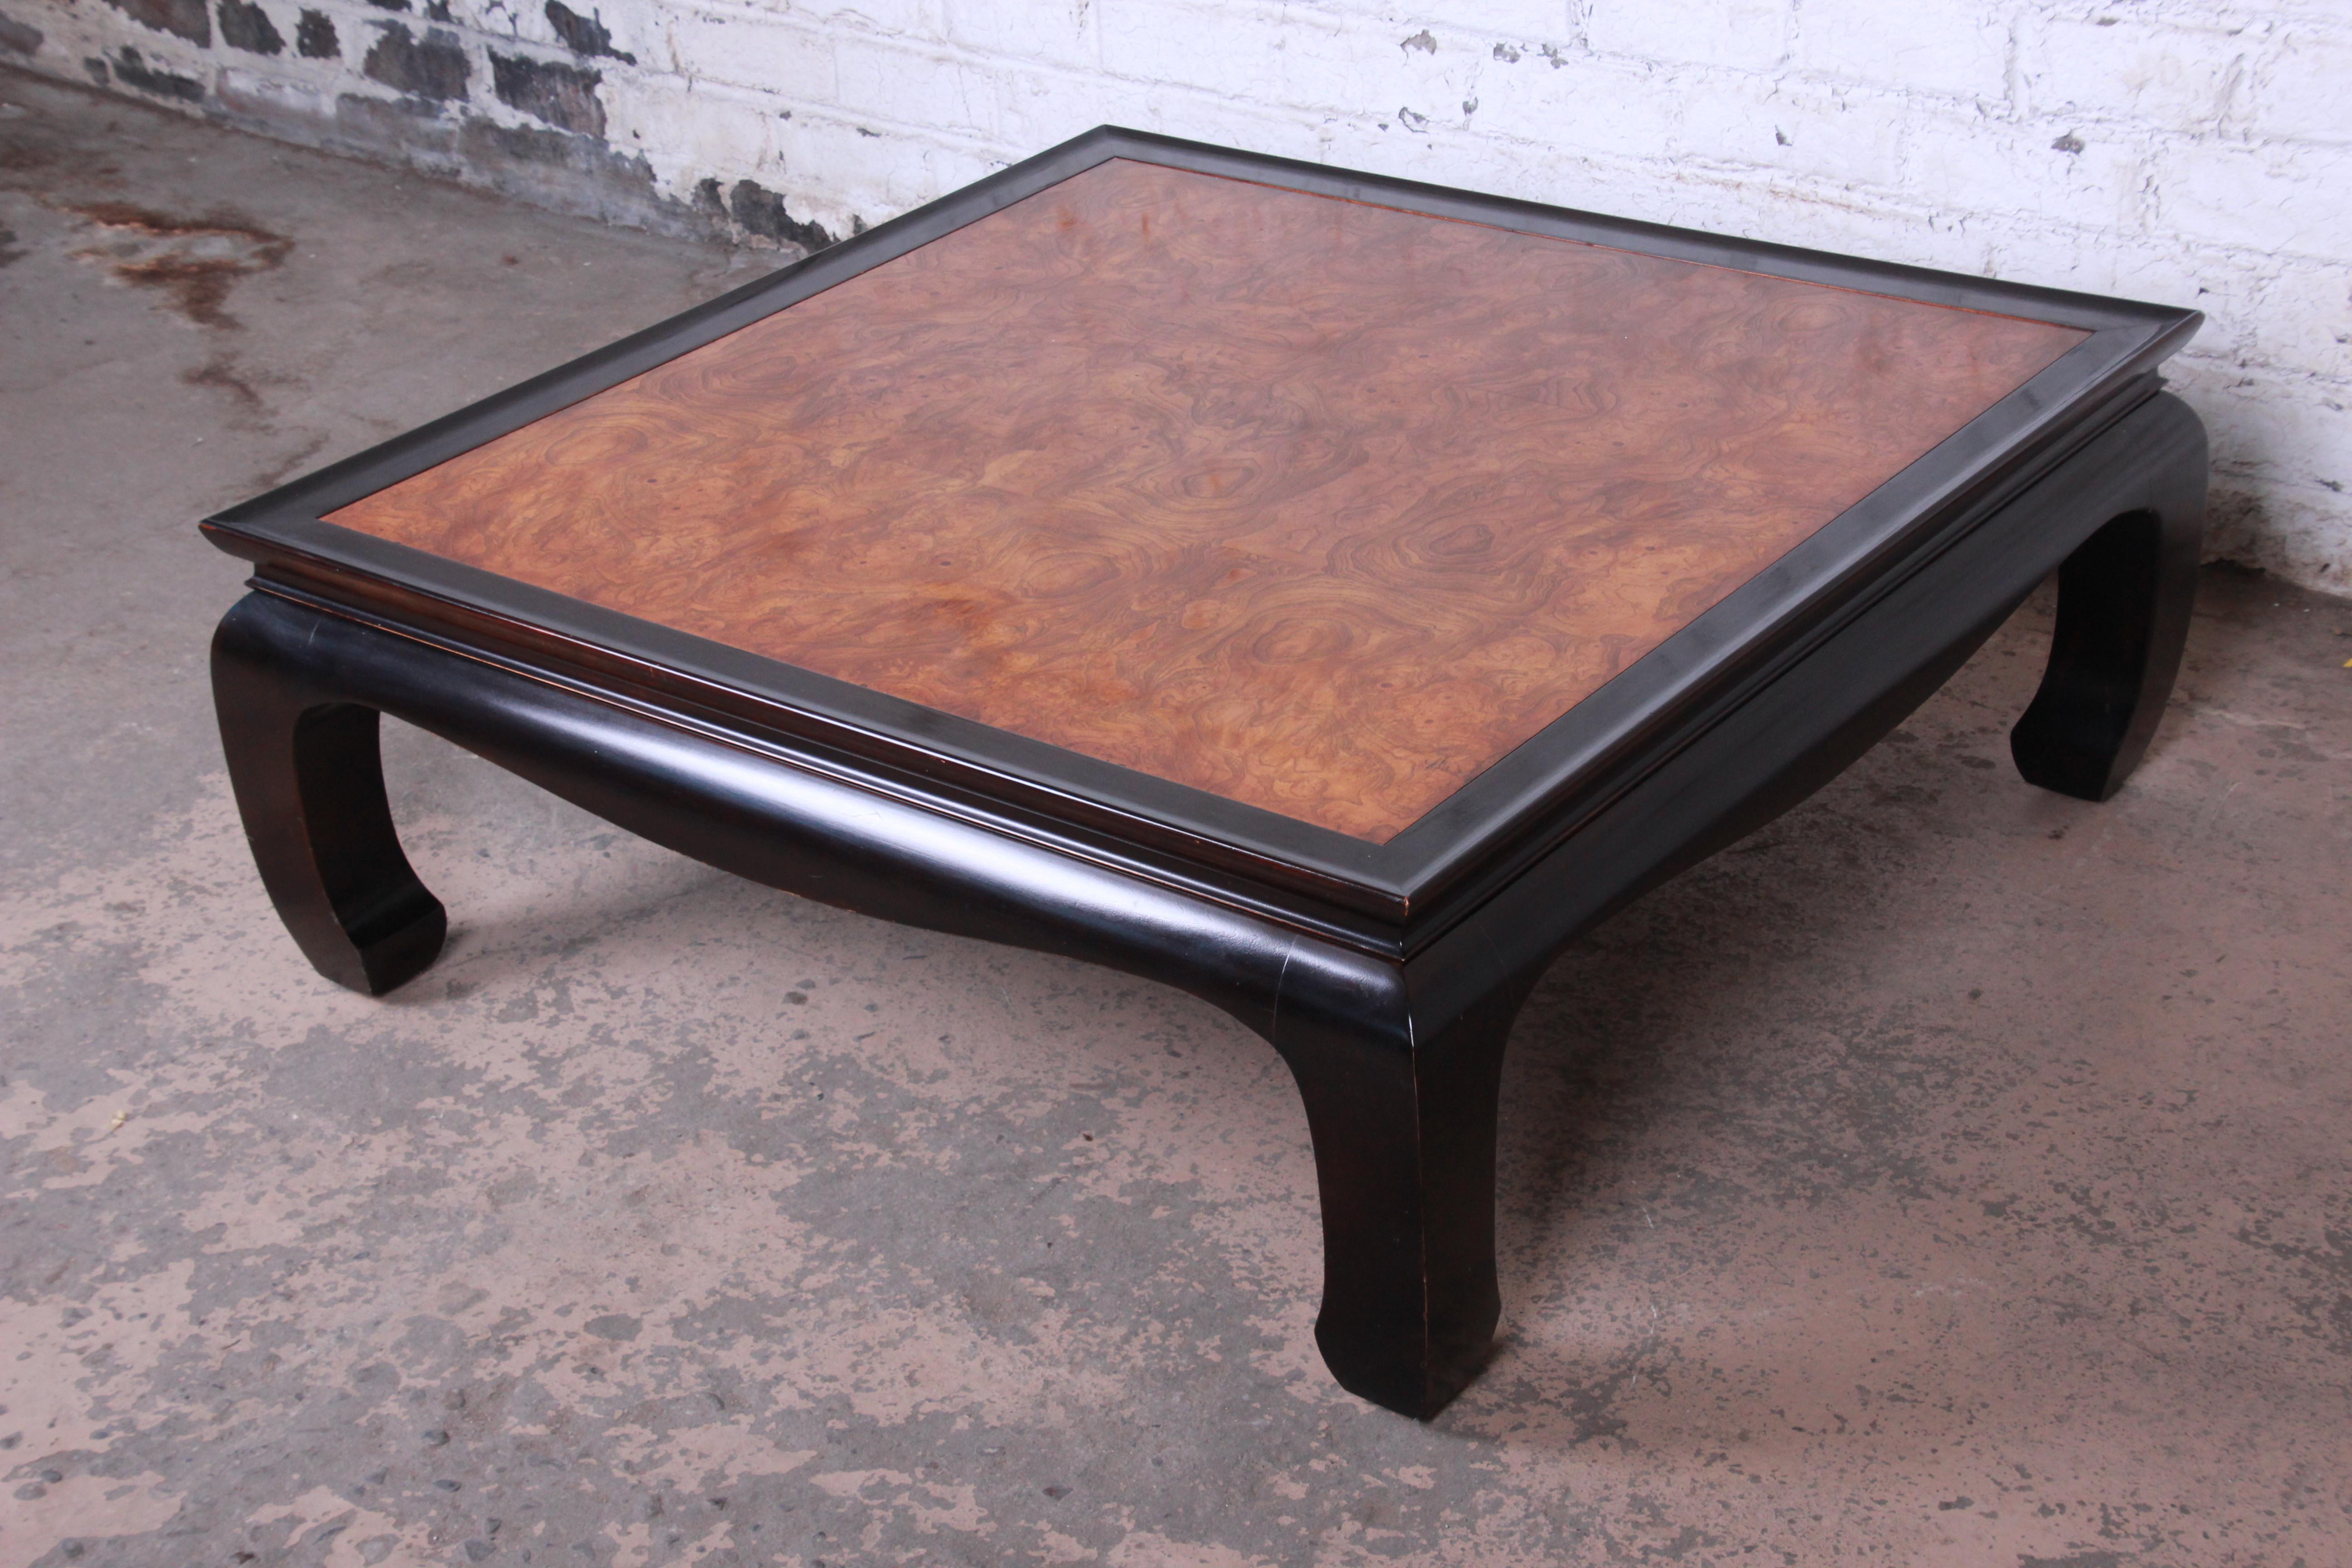 A gorgeous black lacquer and burl wood chinoiserie coffee table from the Chin Hua collection by Century Furniture. The table features stunning burl wood grain and a nice Asian design. It is in very good original vintage condition.